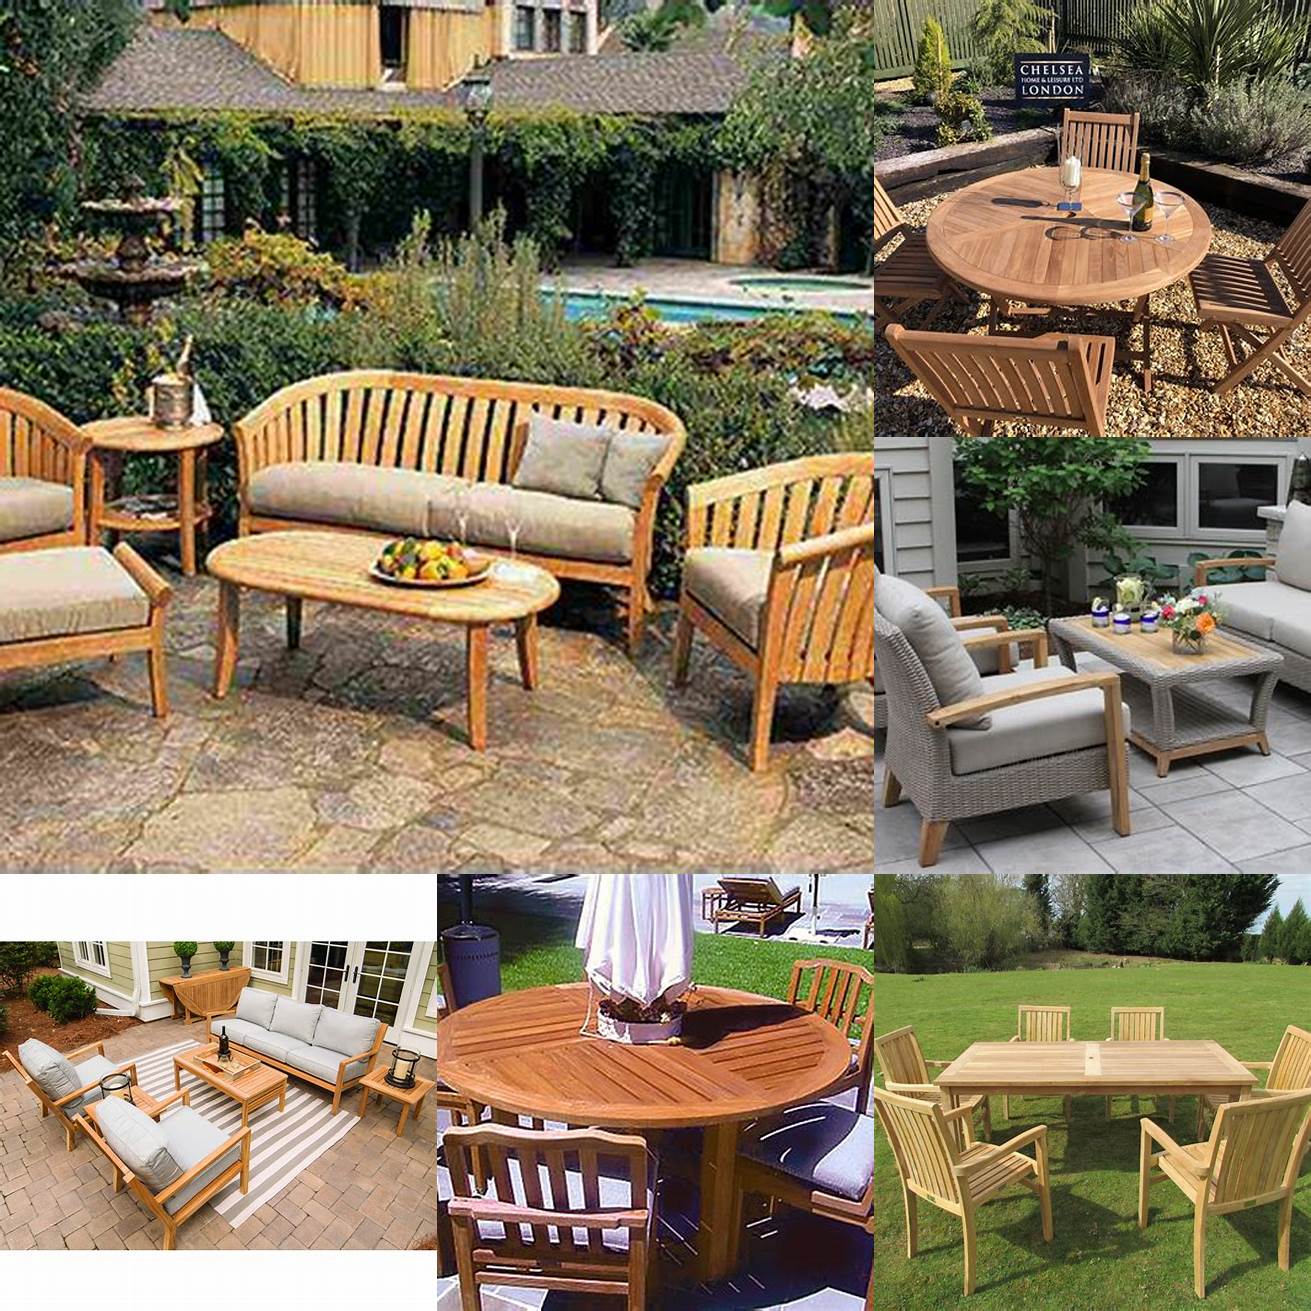 A patio with Roost Finn Teak Furniture